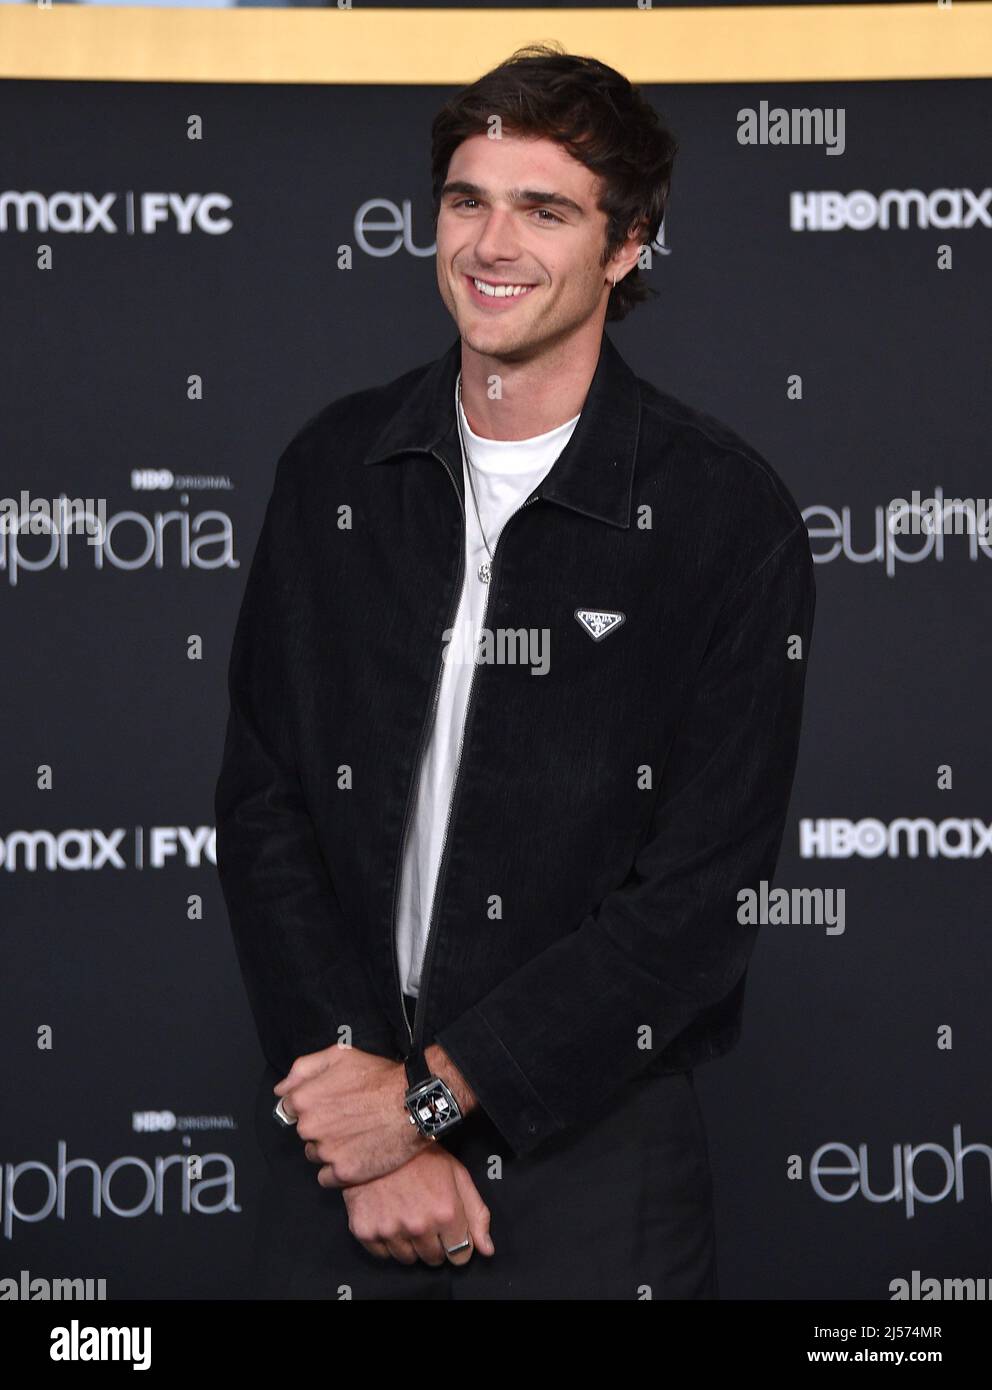 Los Angeles, CA, April 20, 2022, Jacob Elordi arriving to the 